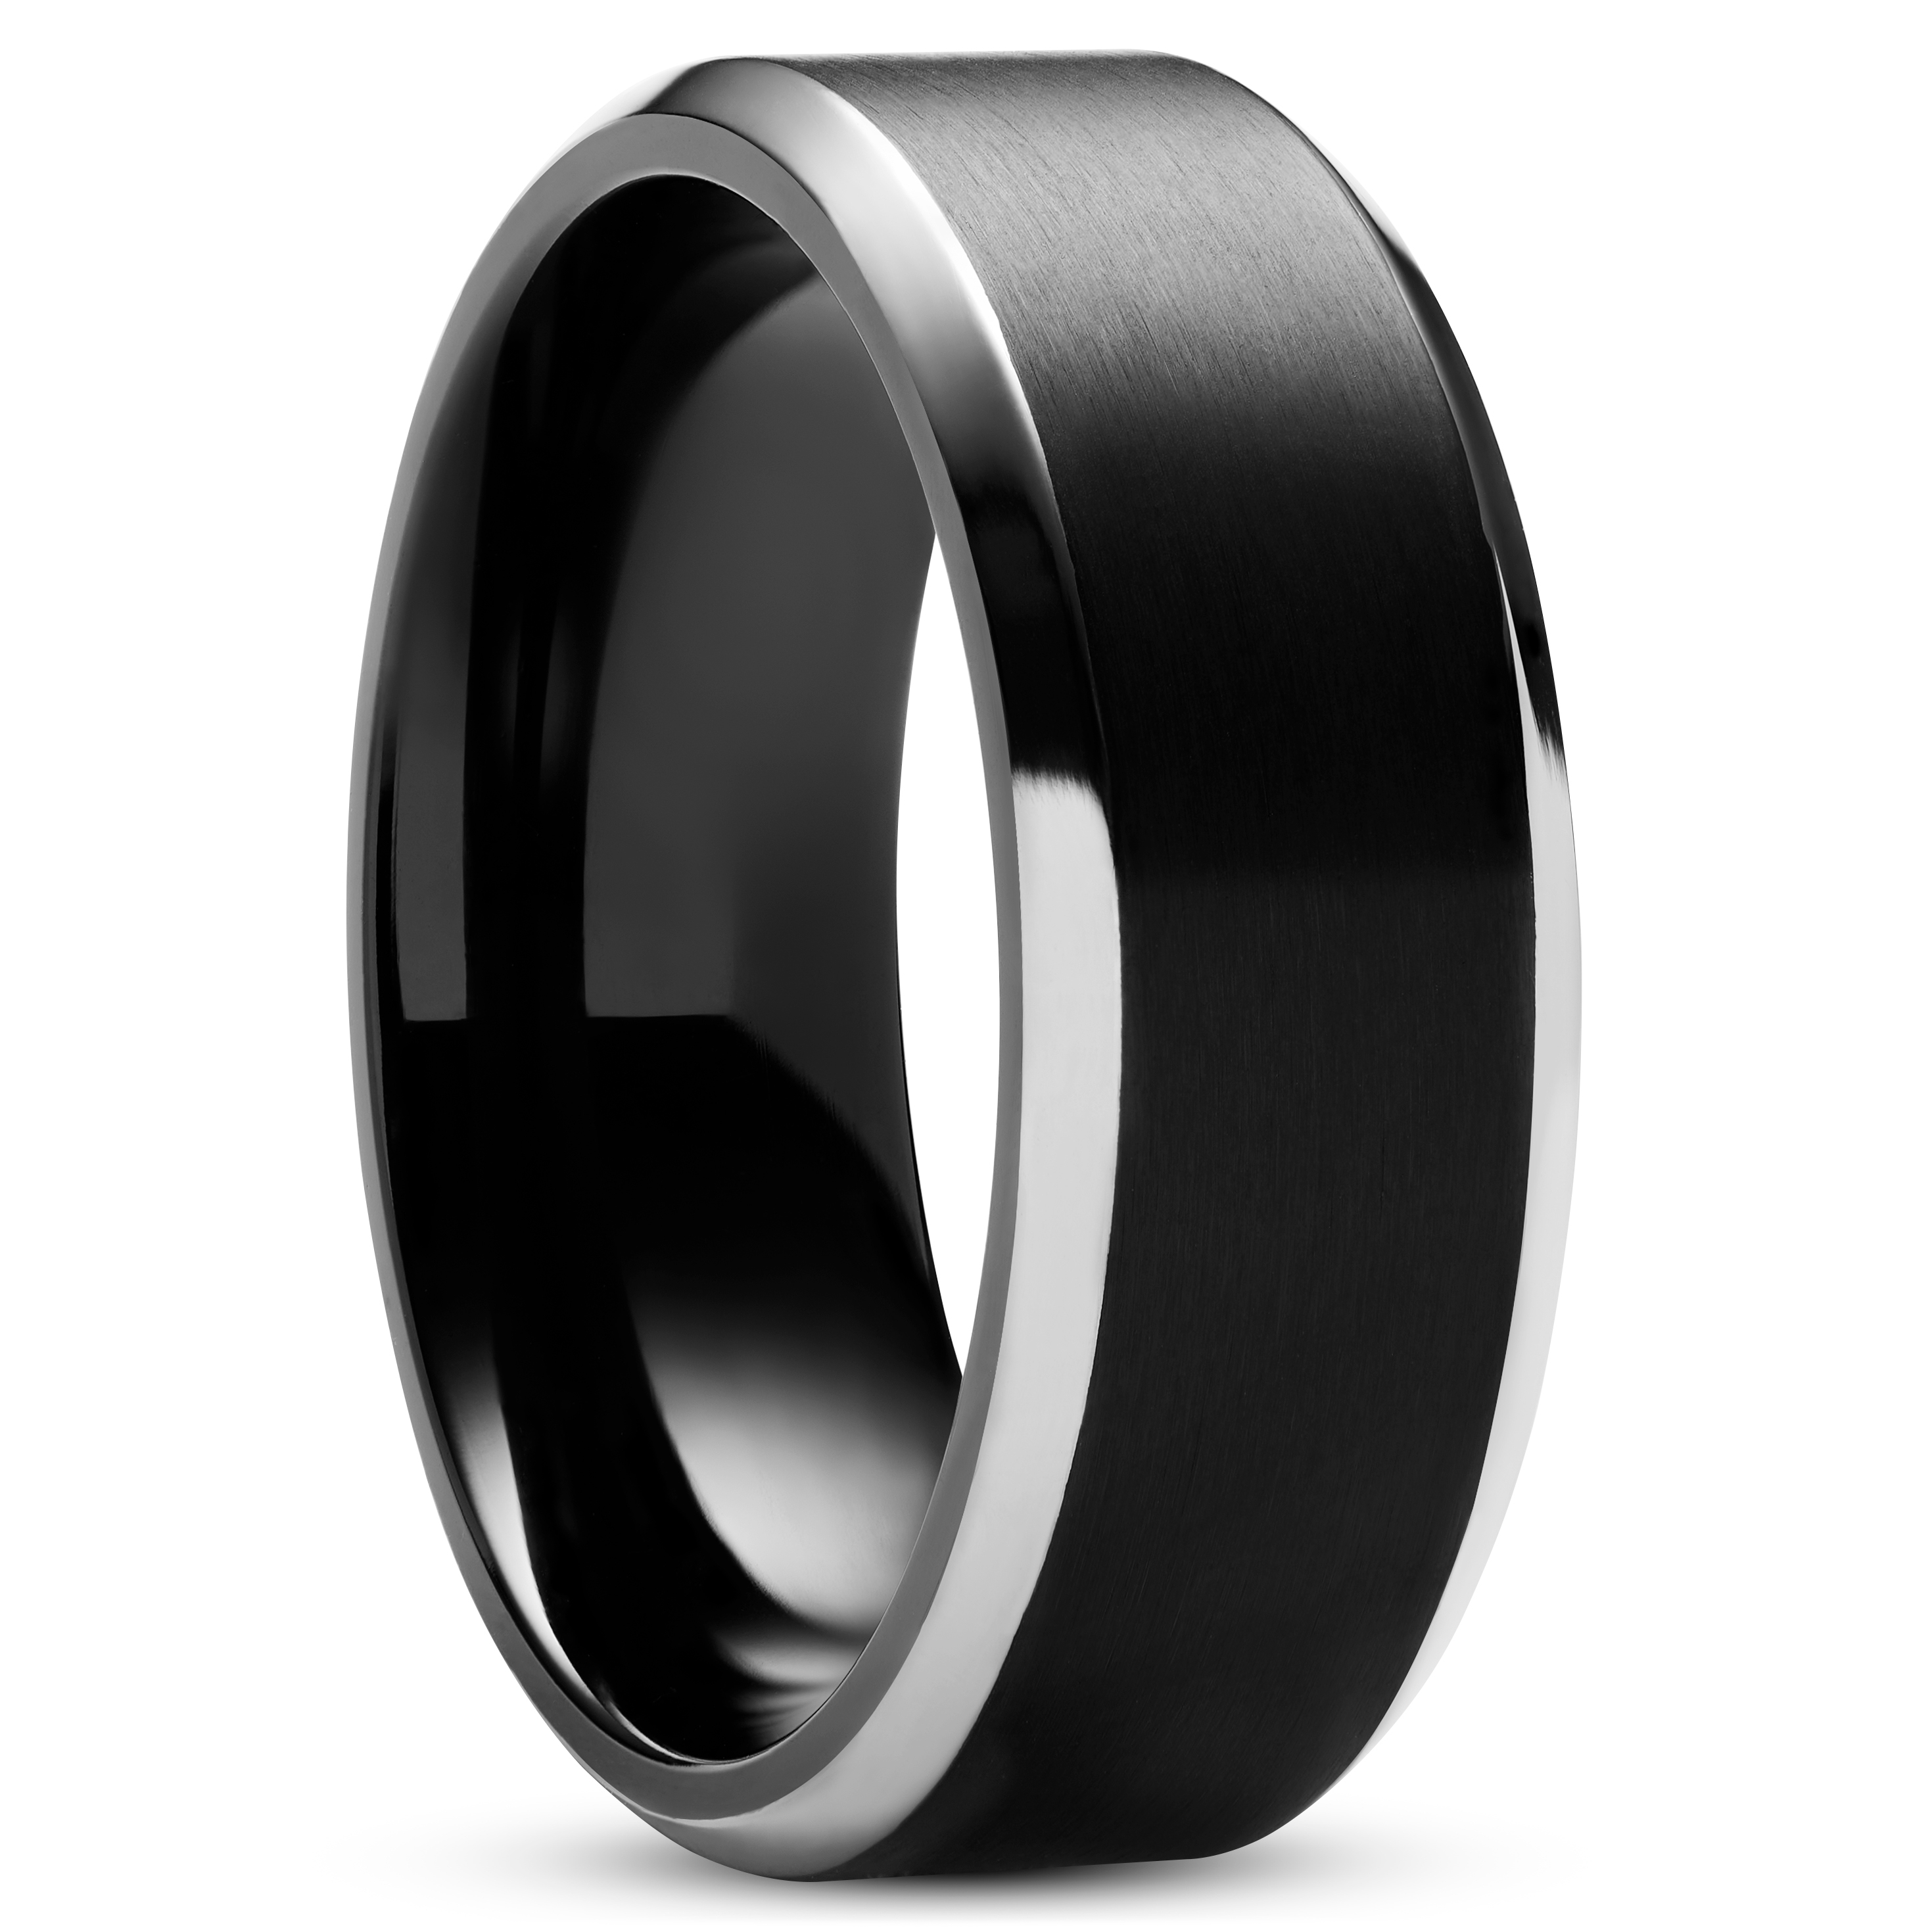 Aesop | 6 mm Polished Black Titanium Ring | In stock! | Lucleon